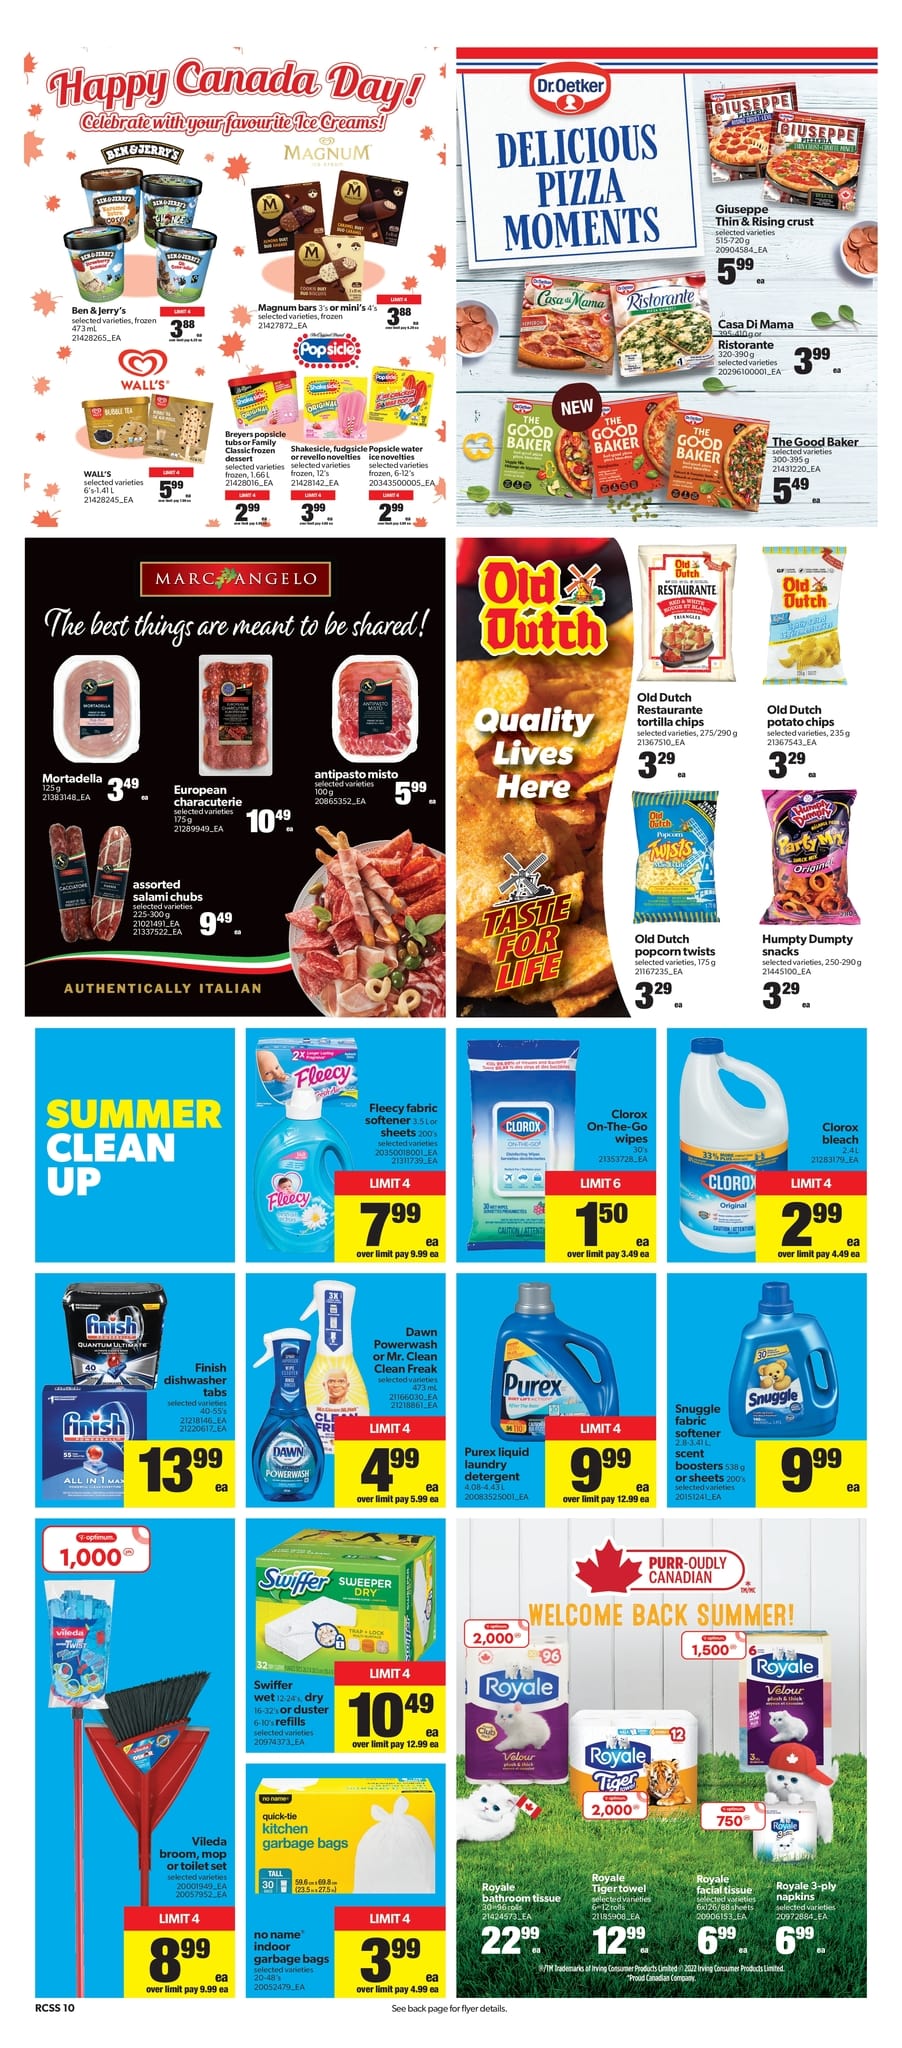 Real Canadian Superstore Ontario - Weekly Flyer Specials - Page 11